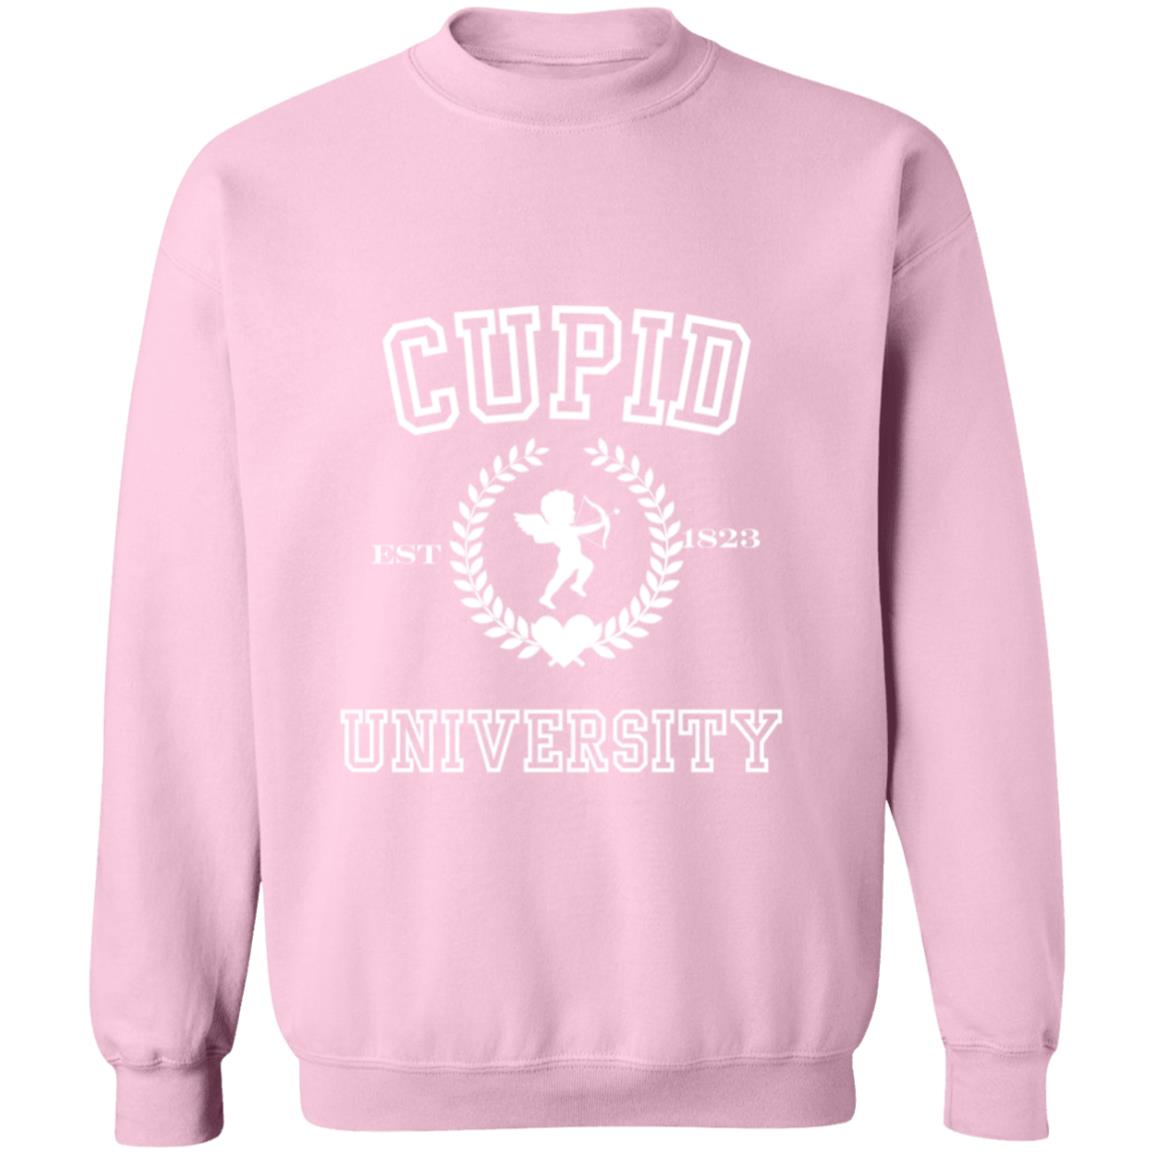 Get trendy with Cupid University (2) Cupid University Crewneck Pullover Sweatshirt - Sweatshirts available at Good Gift Company. Grab yours for $27 today!